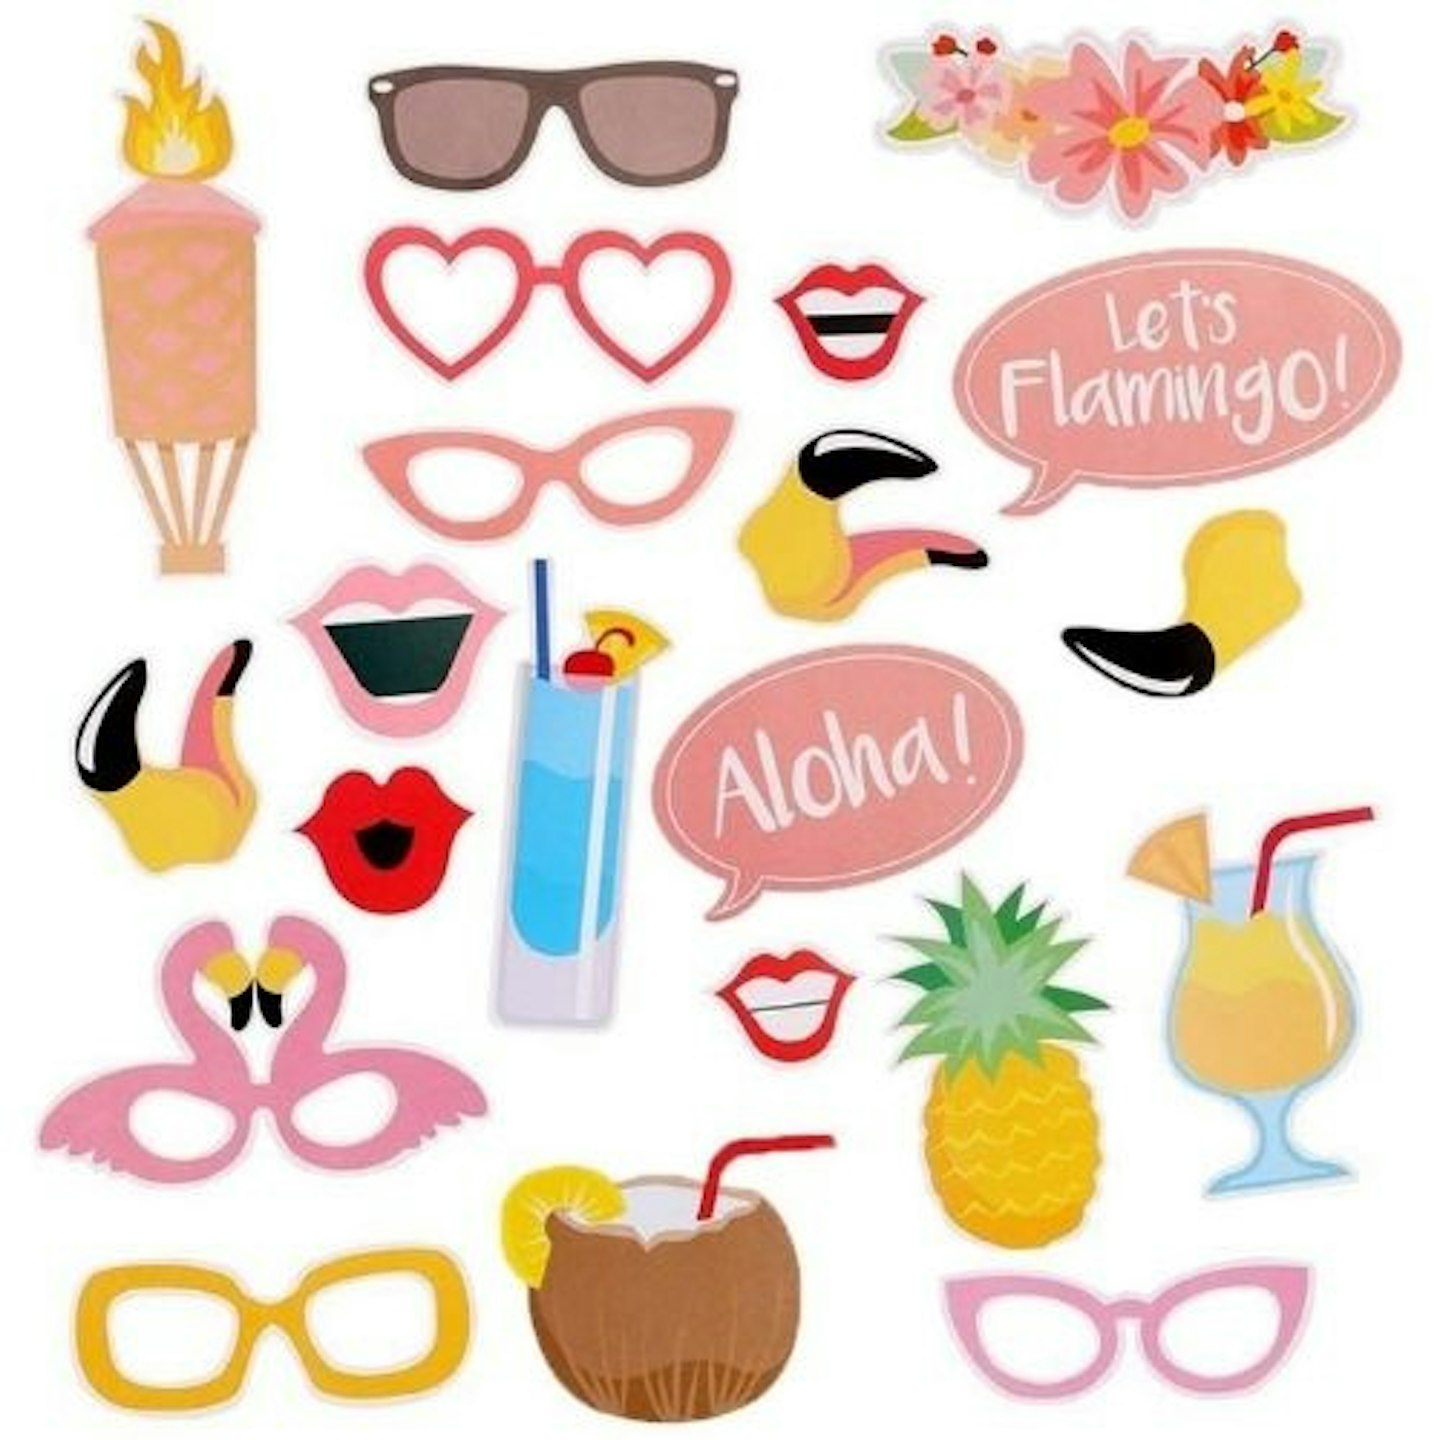 Photo Booth Props, with coconut drinks, glasses and signs that say 'Aloha'.